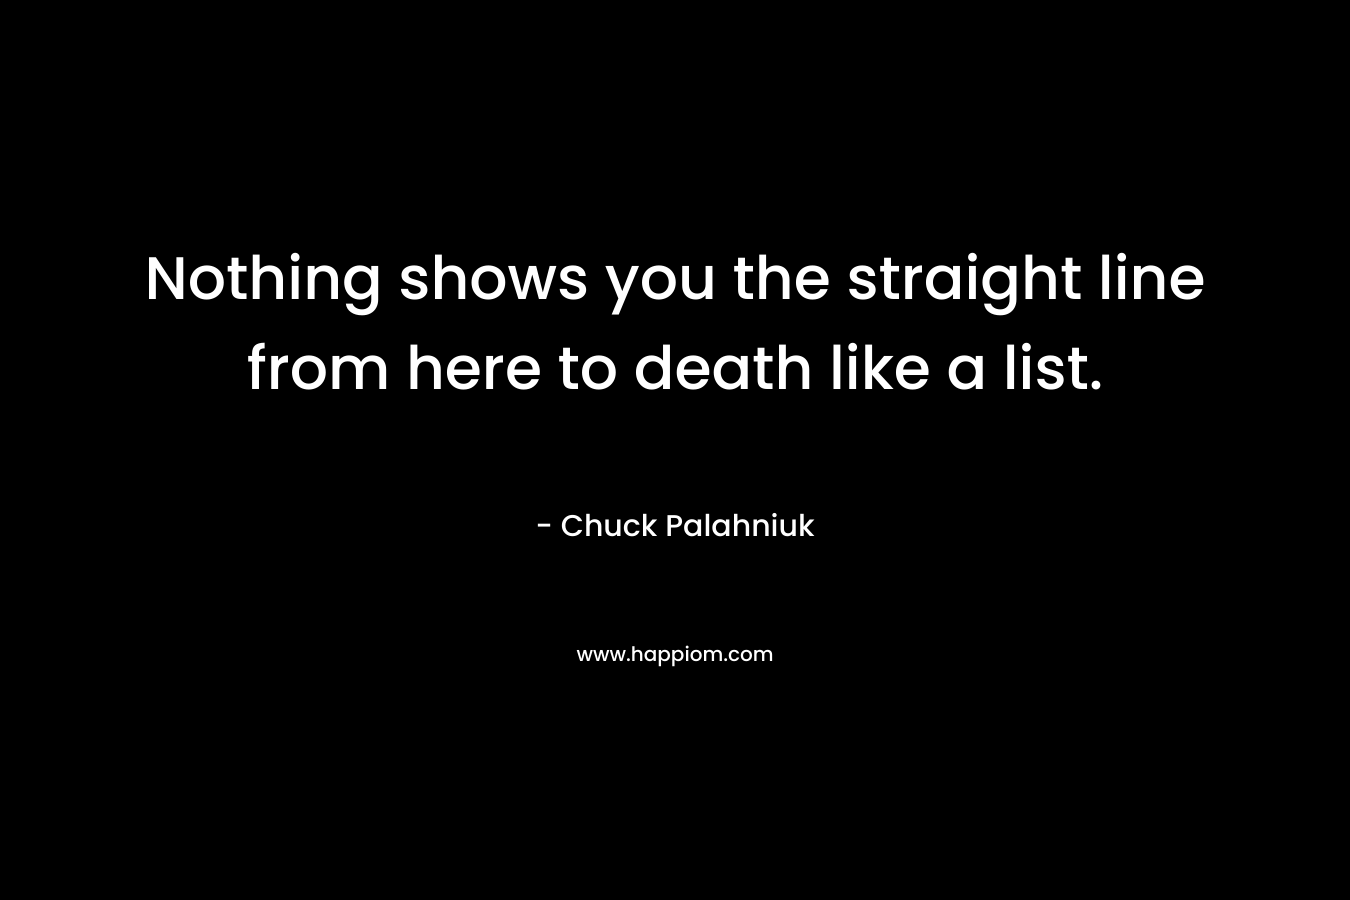 Nothing shows you the straight line from here to death like a list. – Chuck Palahniuk